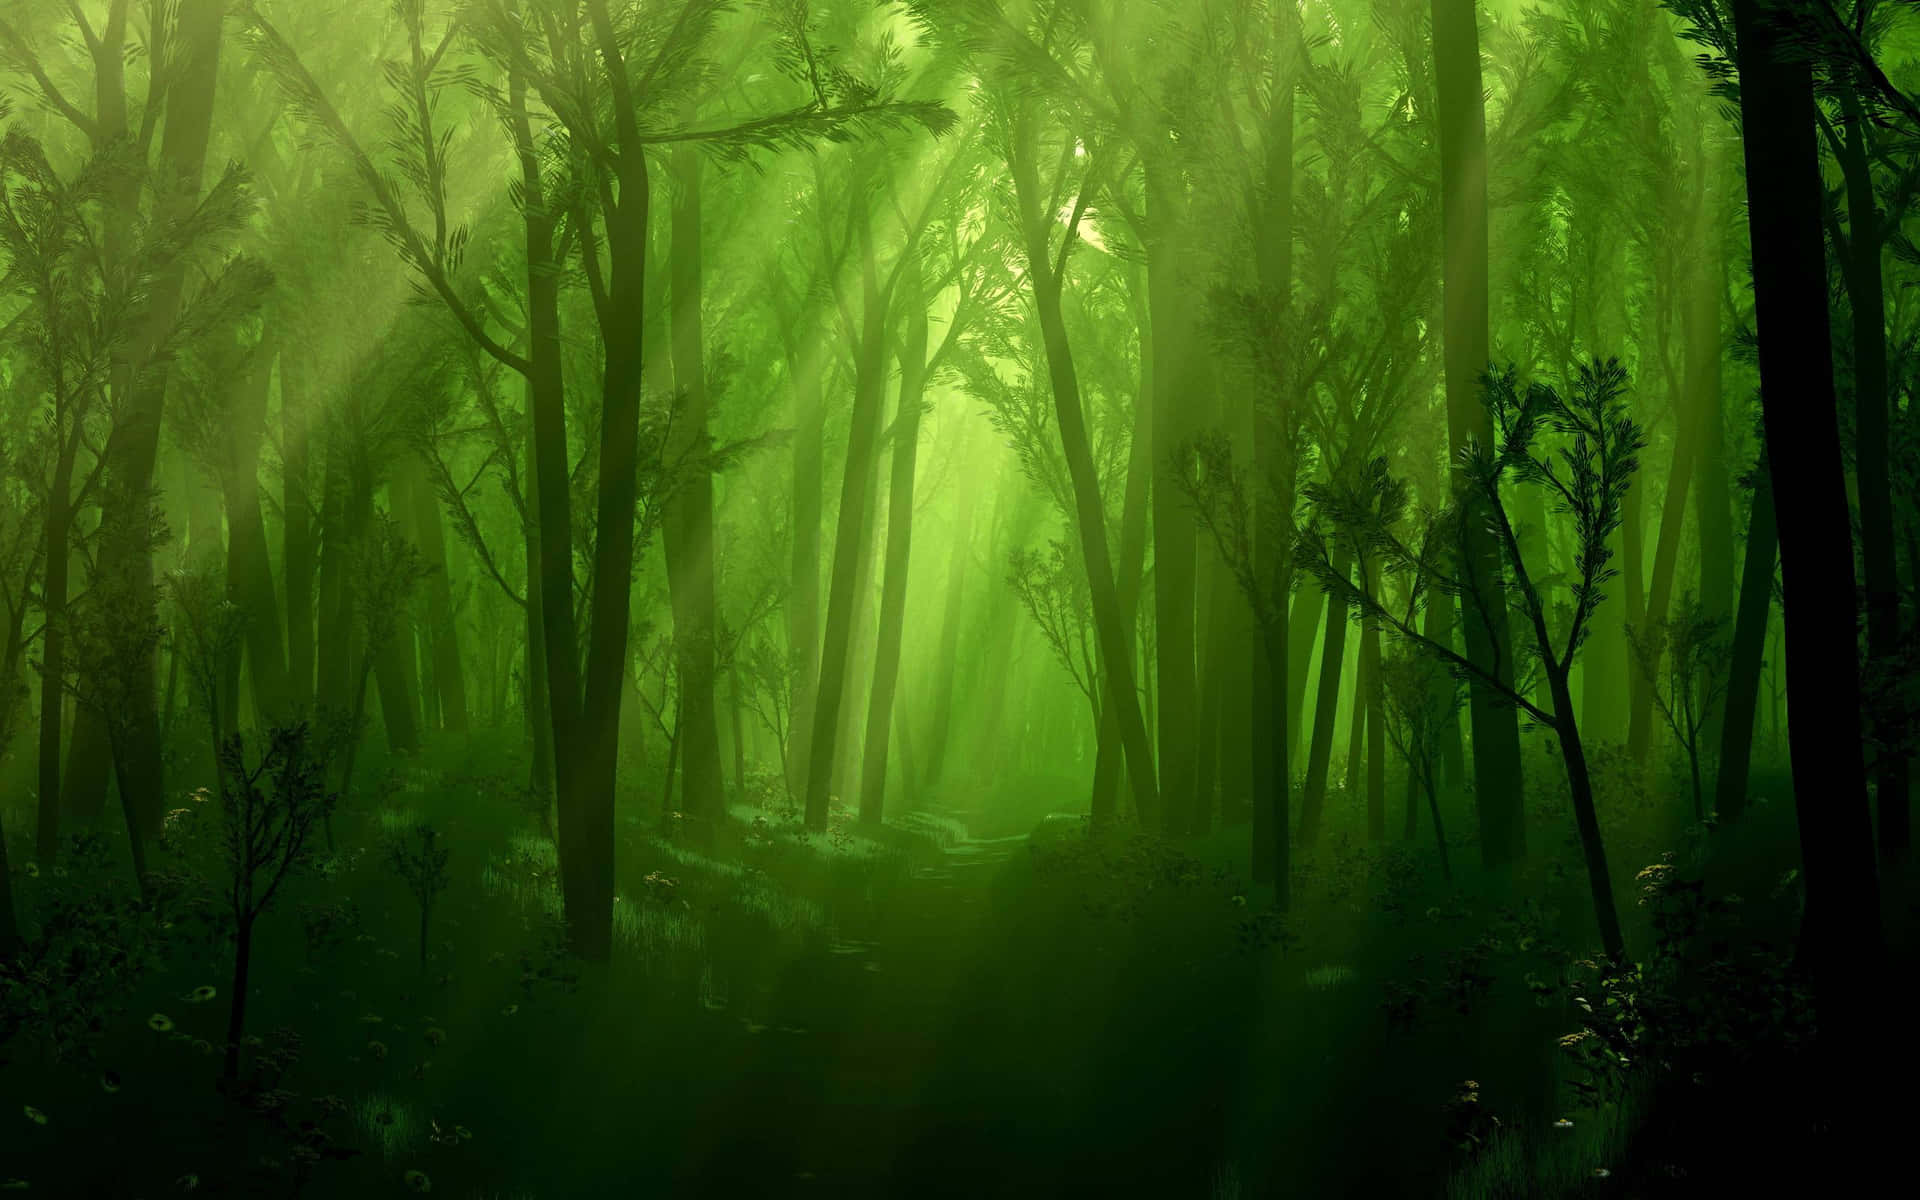 Mystical Enchanted Forest Scenery